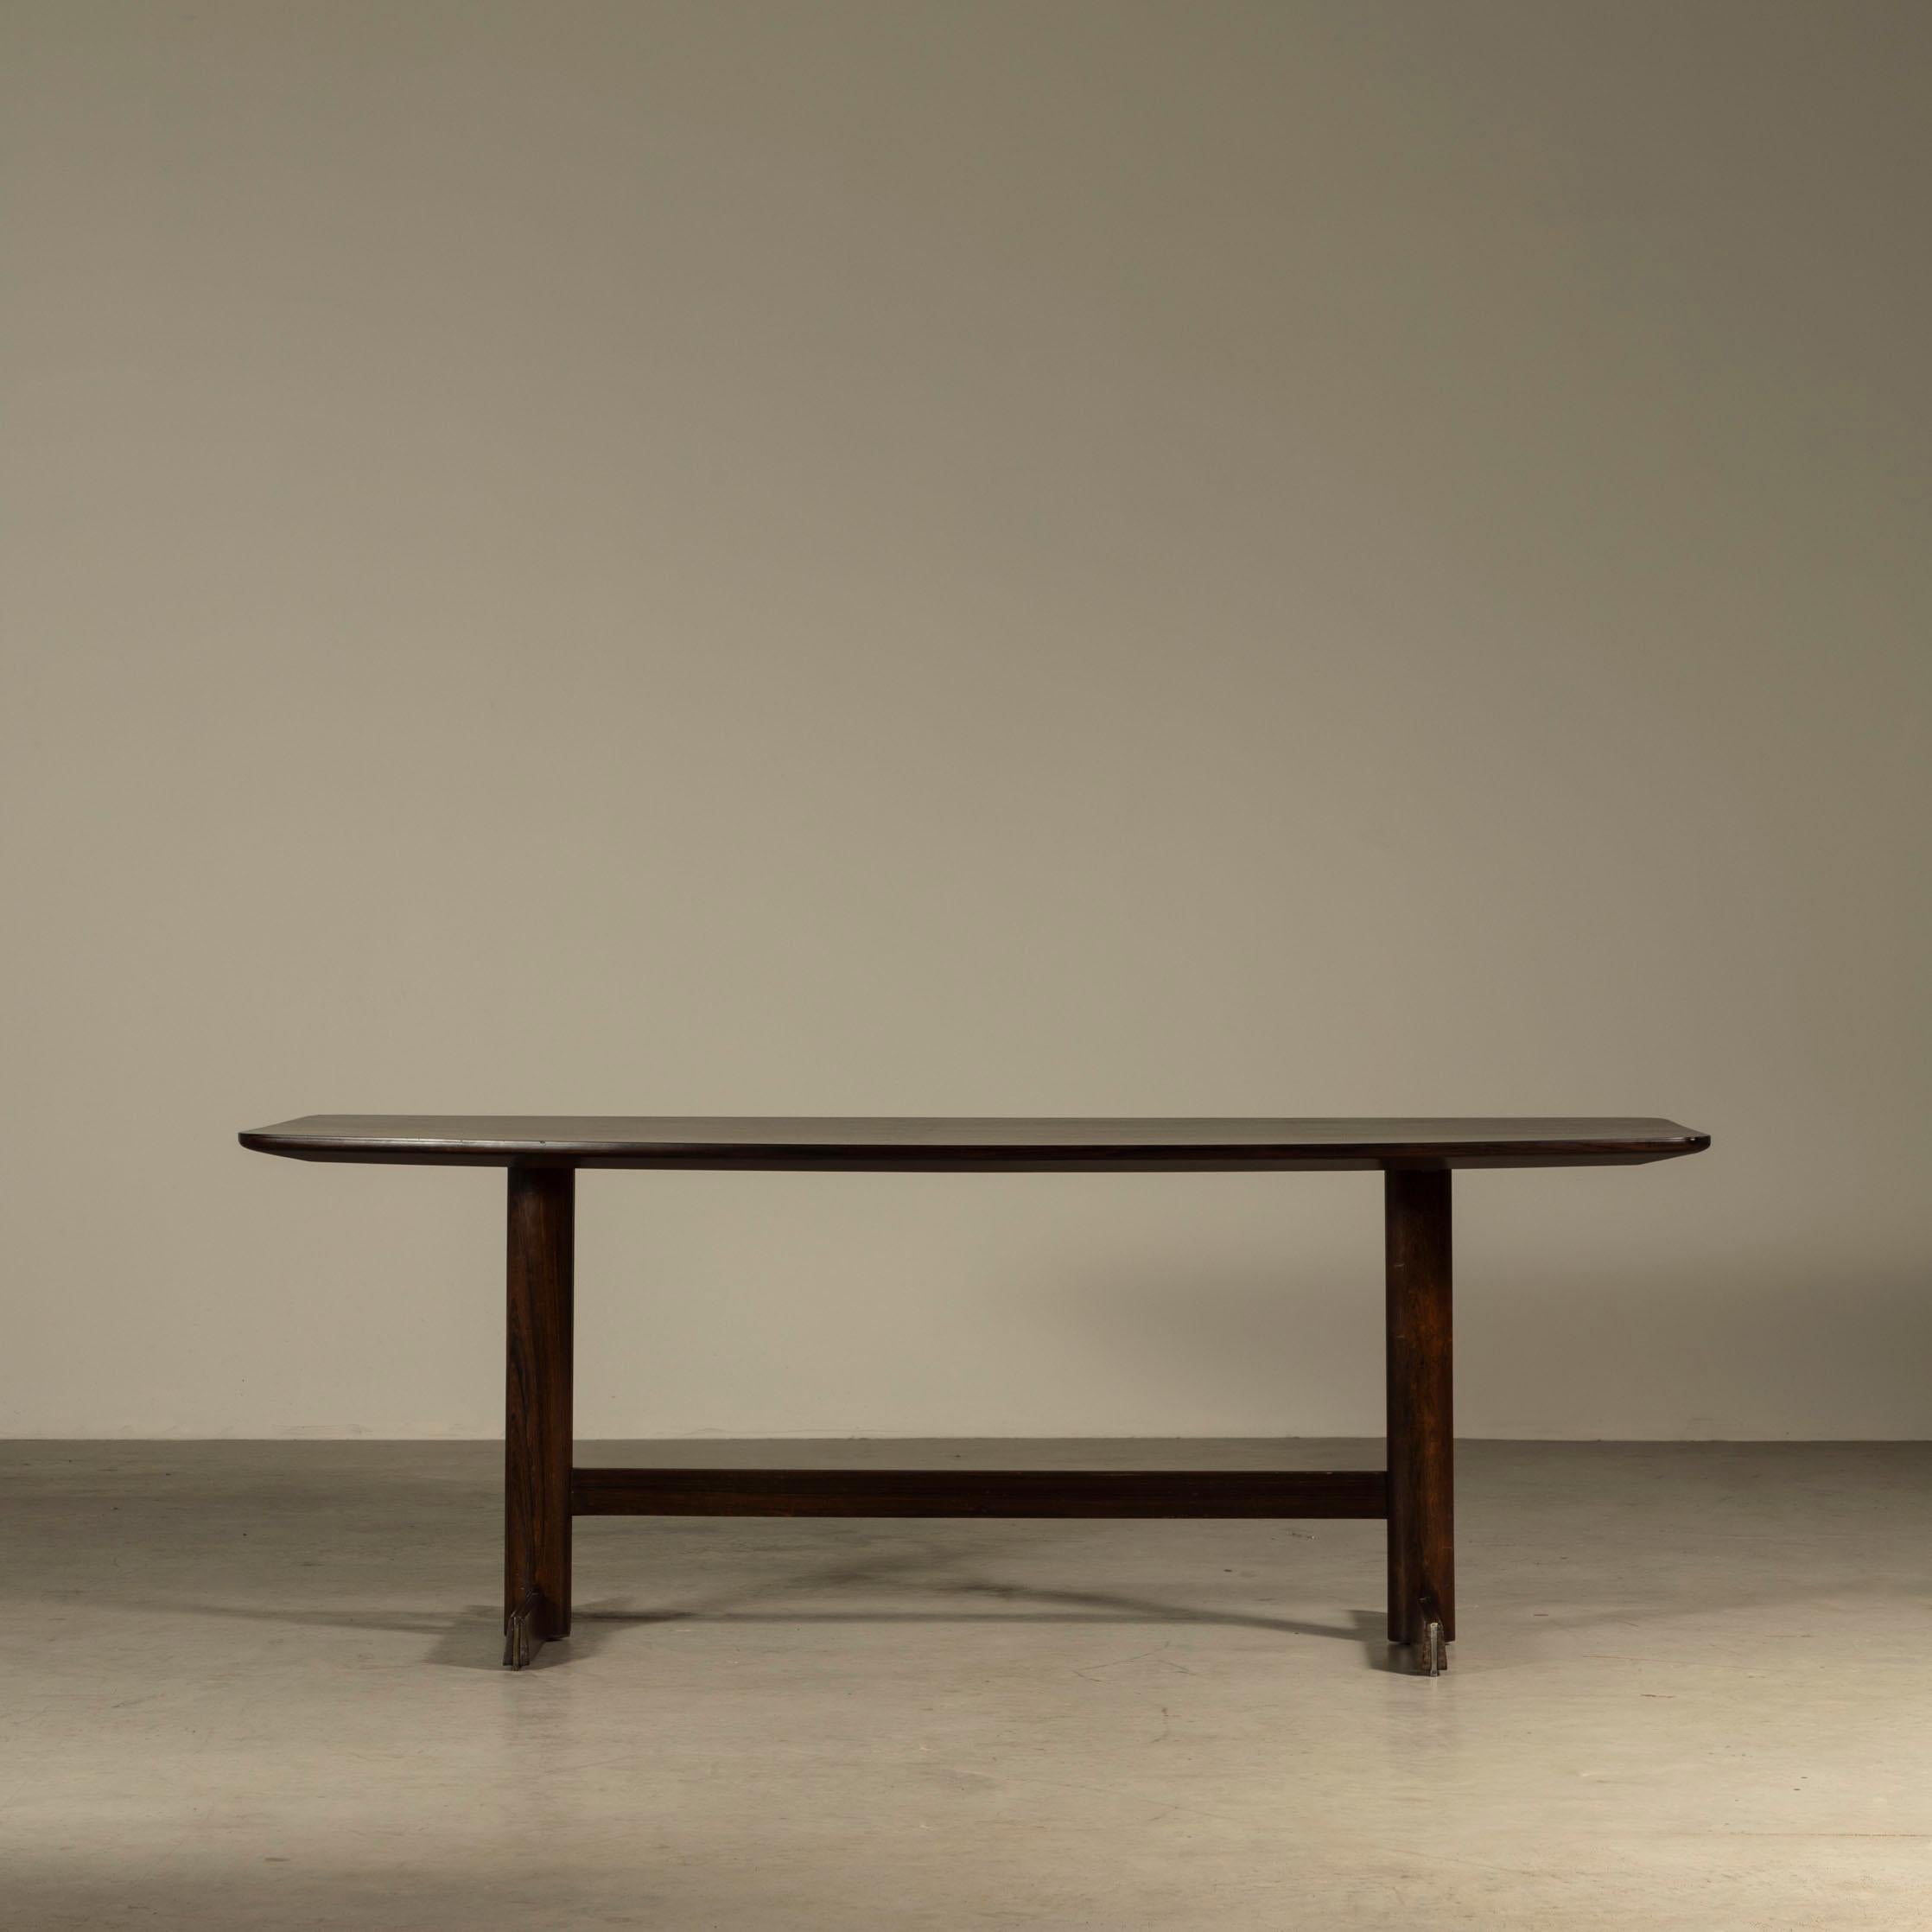 Introducing a masterpiece of Brazilian modern design, this stunning dining room table from L'Atelier embodies the essence of elegance and sophistication. With the genius of Jorge Zalszupin at its helm, L'Atelier has crafted a dining table that is